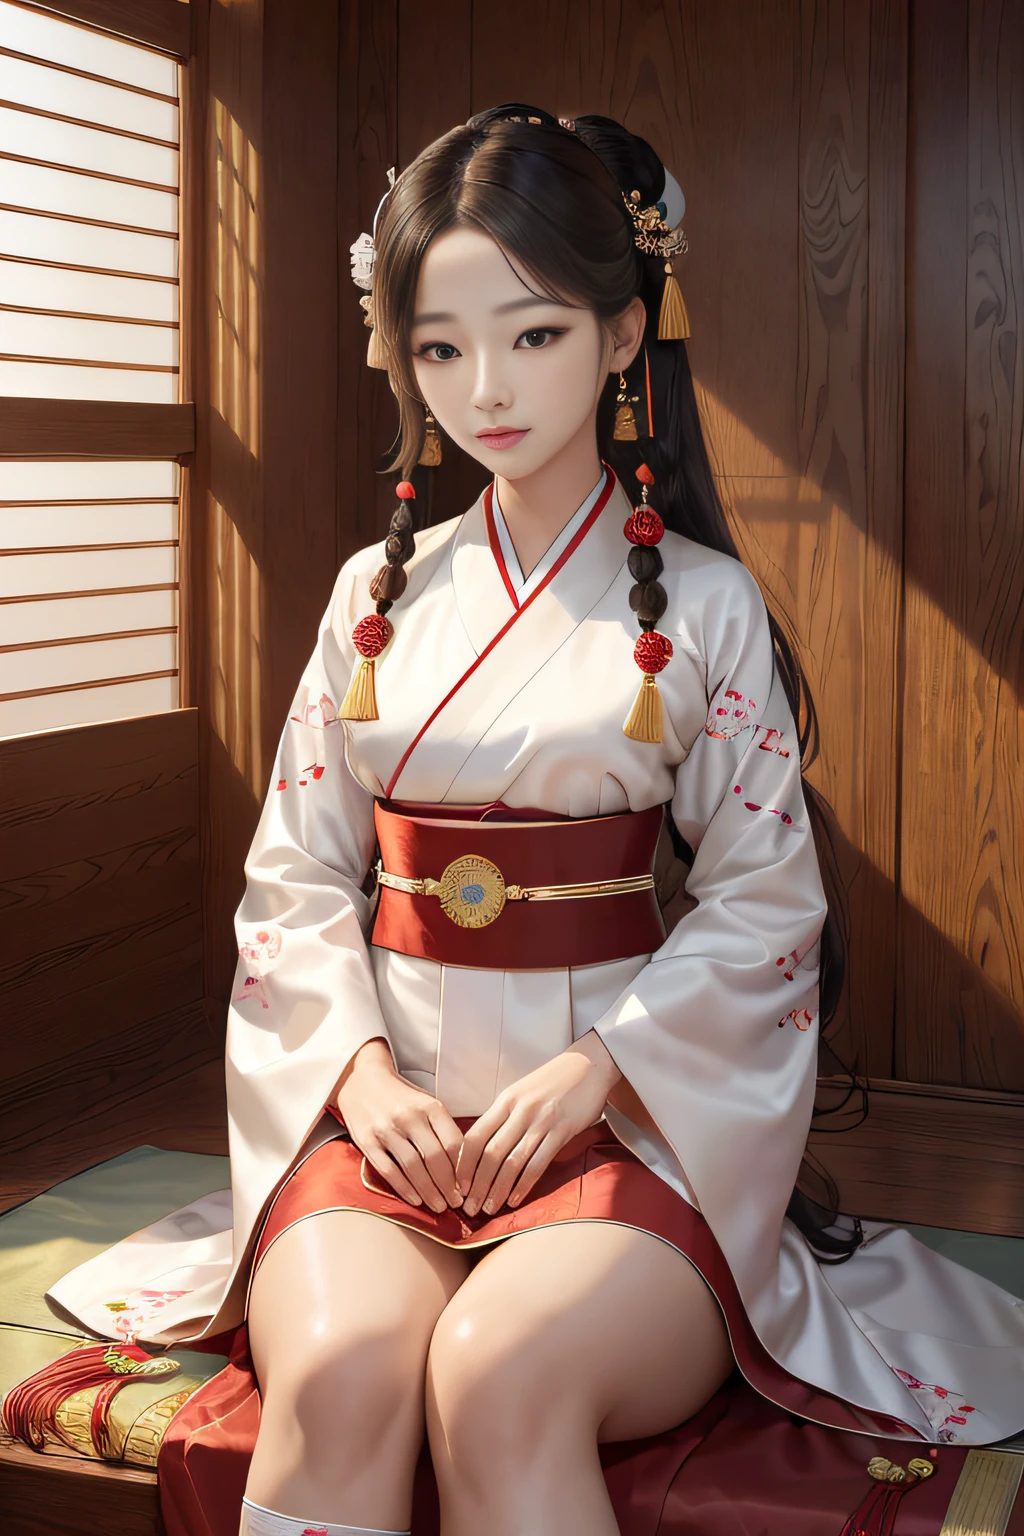 masutepiece, (Best Quality:1.4), realisitic, Highly Detailed CG Unified 8k Wallpaper, ighly Details, High Definition RAW Color Photography, professional photoshooting, realistic portrait, Cinematic light, beautiful detail, Hanbok Harmony is a graceful and culturally rich female hero who proudly wears the traditional Korean hanbok. Her hanbok is a masterpiece of craftsmanship, with vibrant colors, intricate embroidery, and graceful lines that pay homage to Korea's rich cultural heritage. The hanbok is complemented by traditional accessories such as a norigae (ornamental tassel), beoseon (traditional socks), and a jeogori (jacket). Hanbok Harmony's long, flowing hair is adorned with elegant hairpins, and her eyes reflect the wisdom and beauty of her Korean heritage. Her presence exudes a sense of elegance and cultural pride.